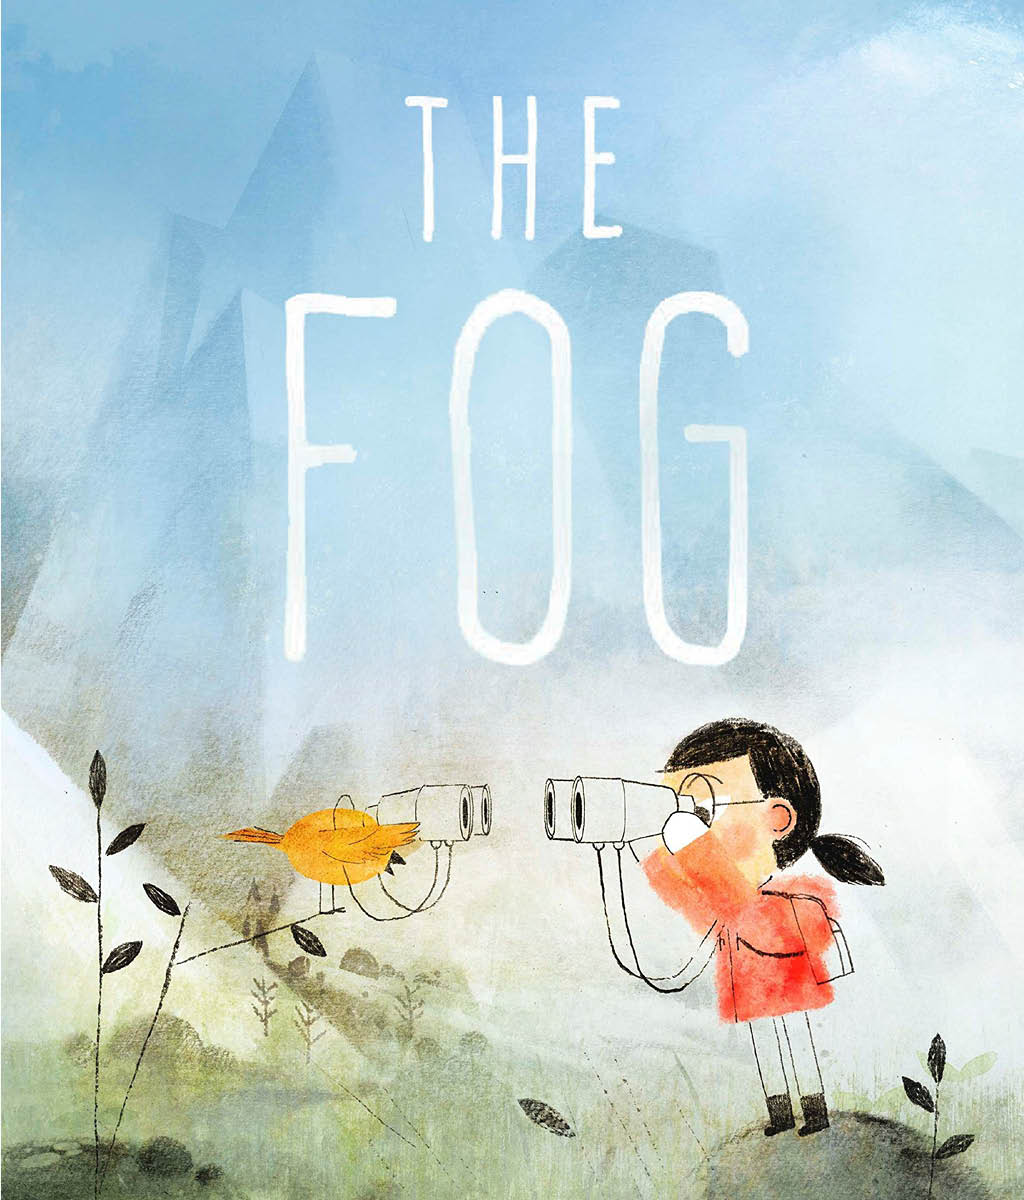 The Fog by Kyo Maclear